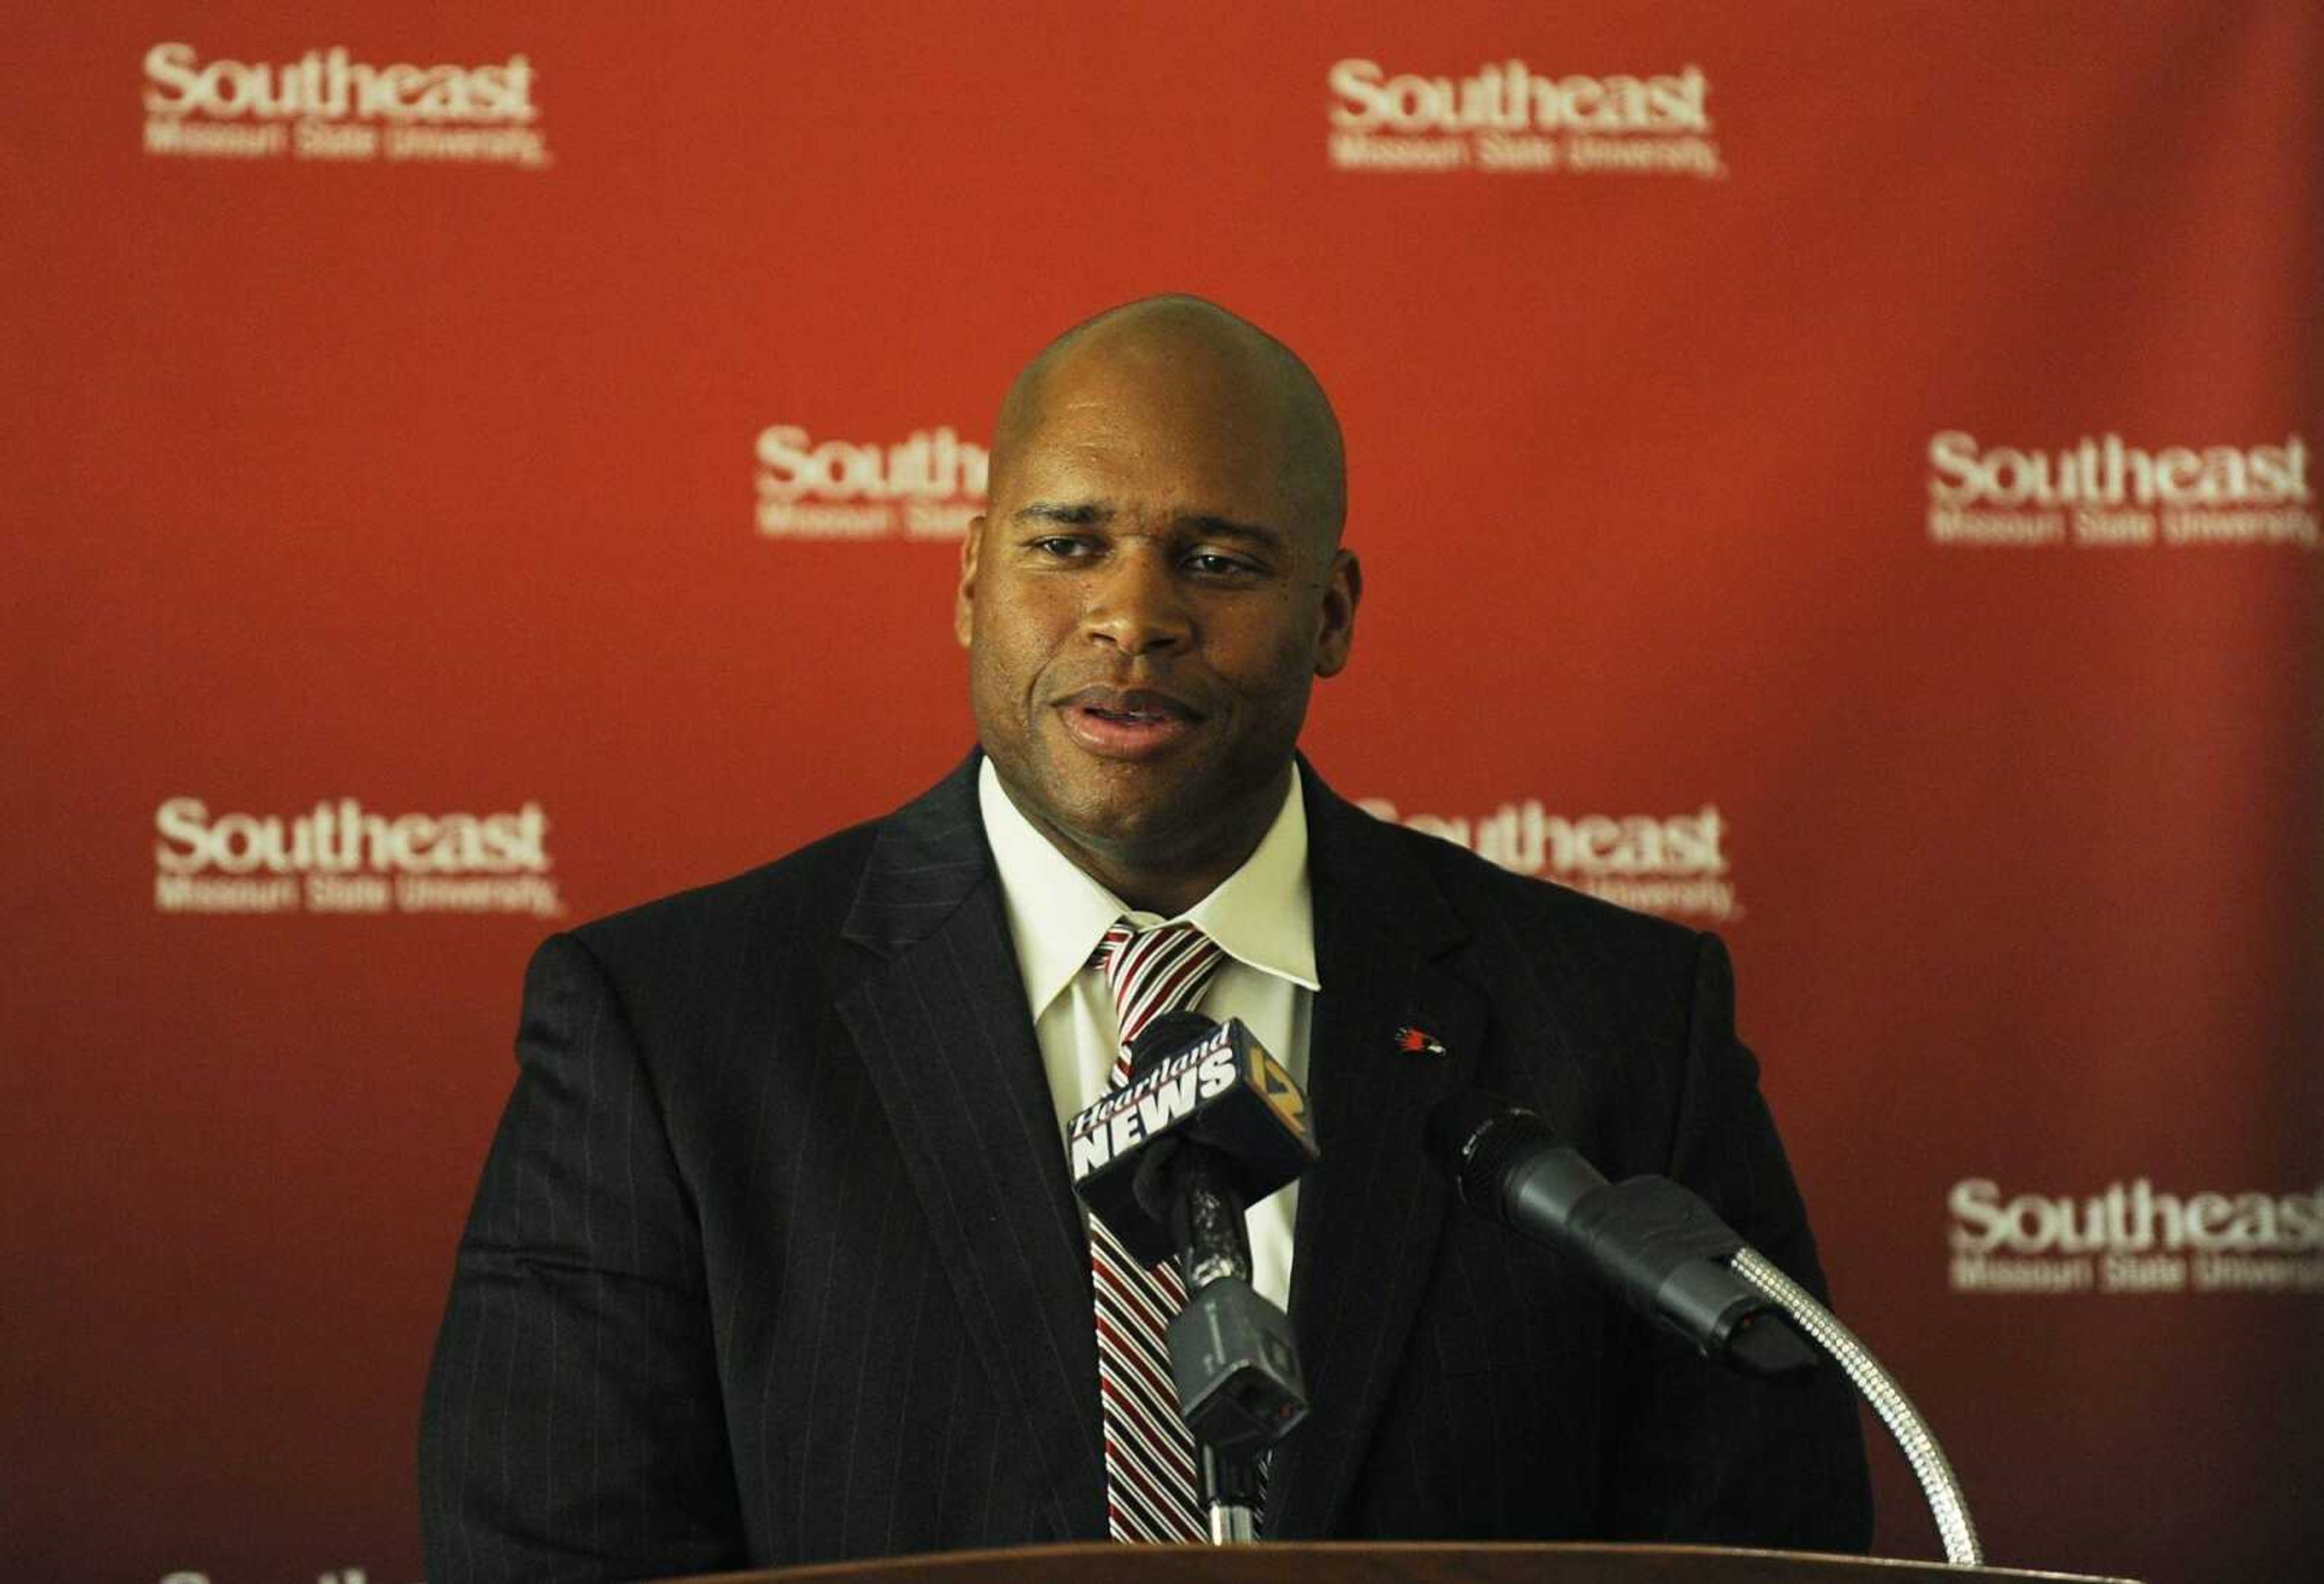 New athletic director for Southeast has been announced